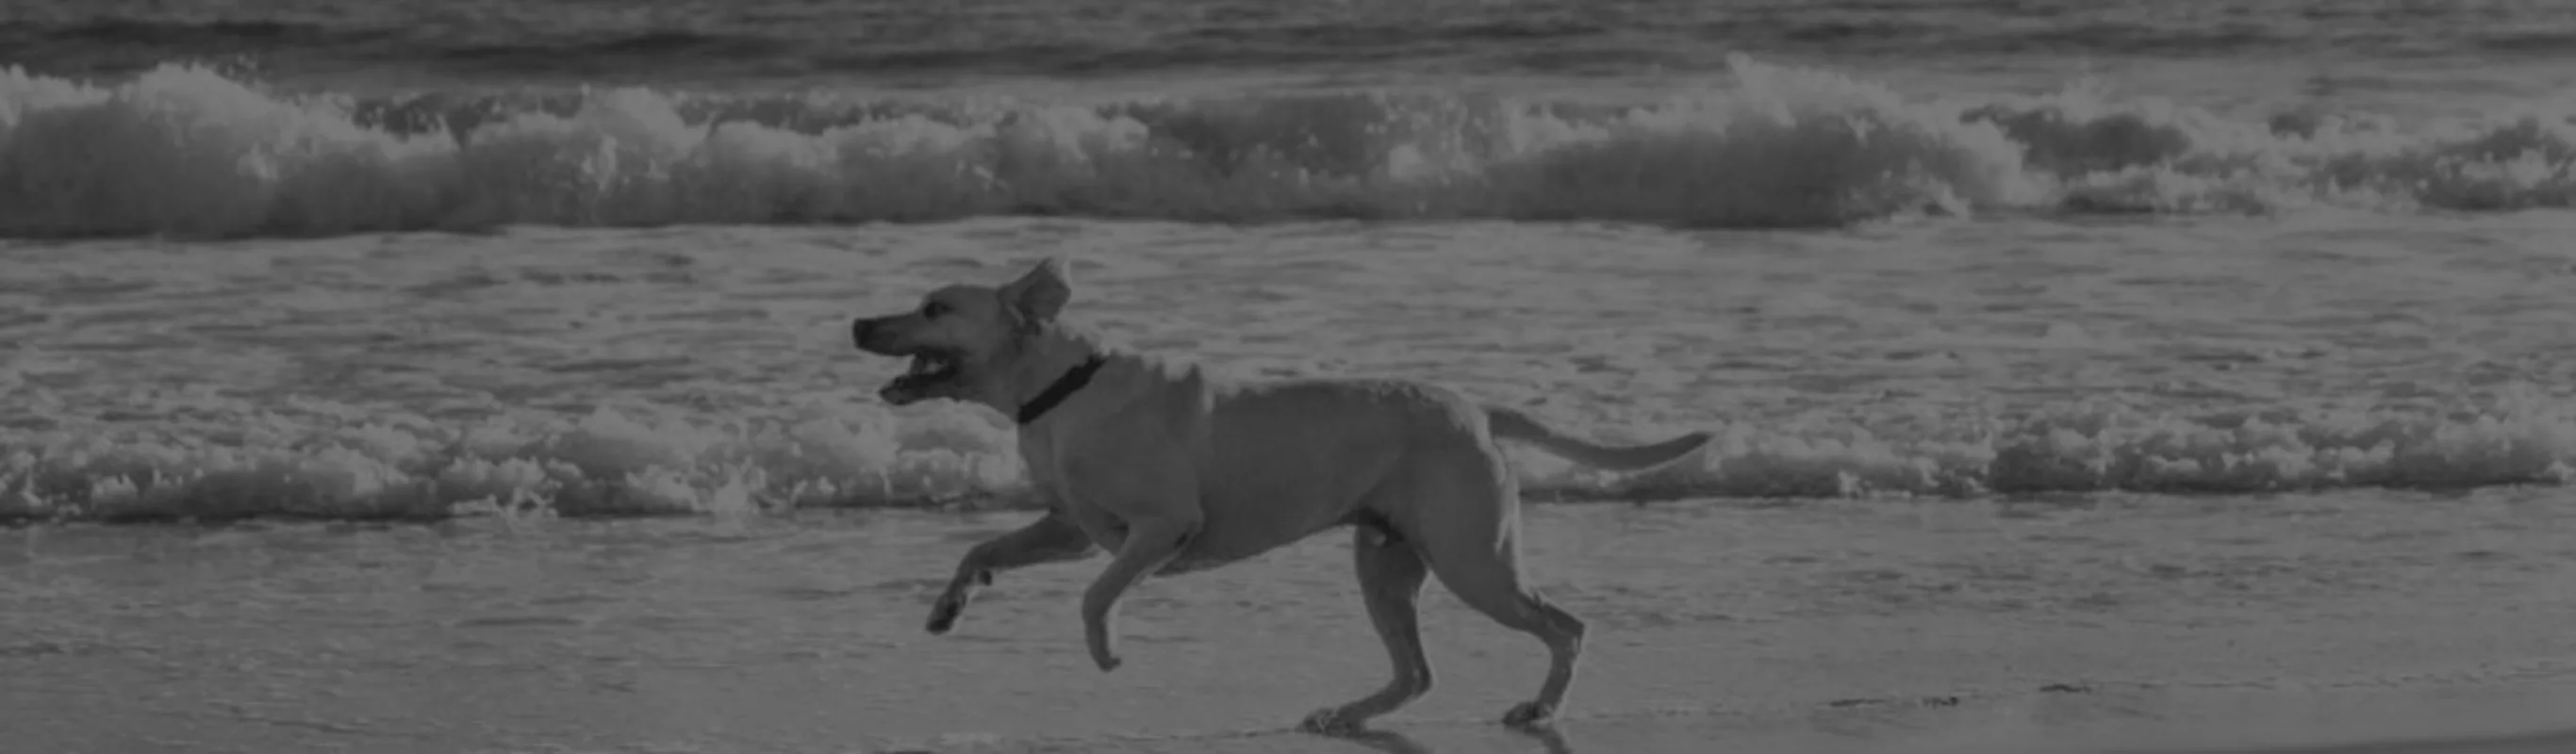 Black and white photo of dog running on the ebach